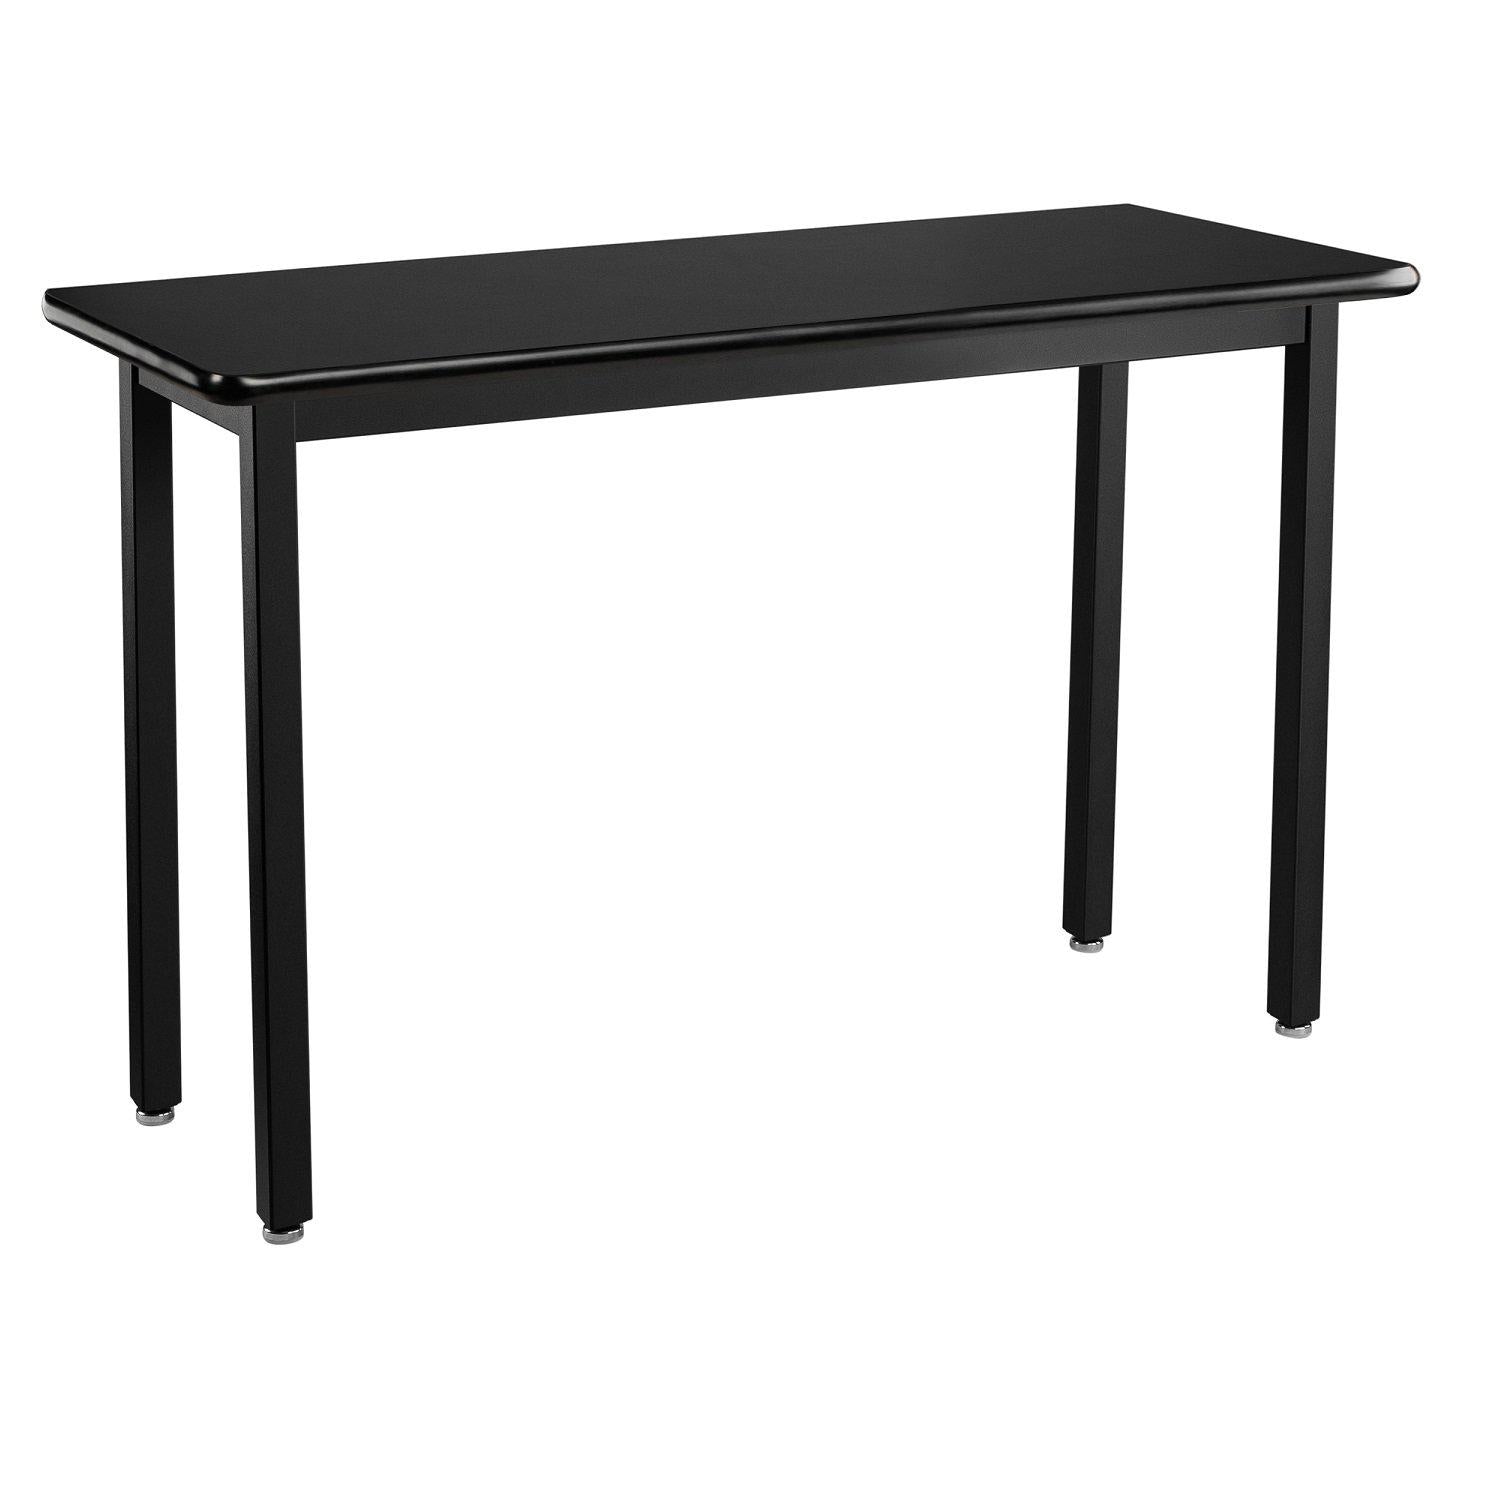 Heavy-Duty Fixed Height Utility Table, Black Frame, 18" x 42", High-Pressure Laminate Top with T-Mold Edge